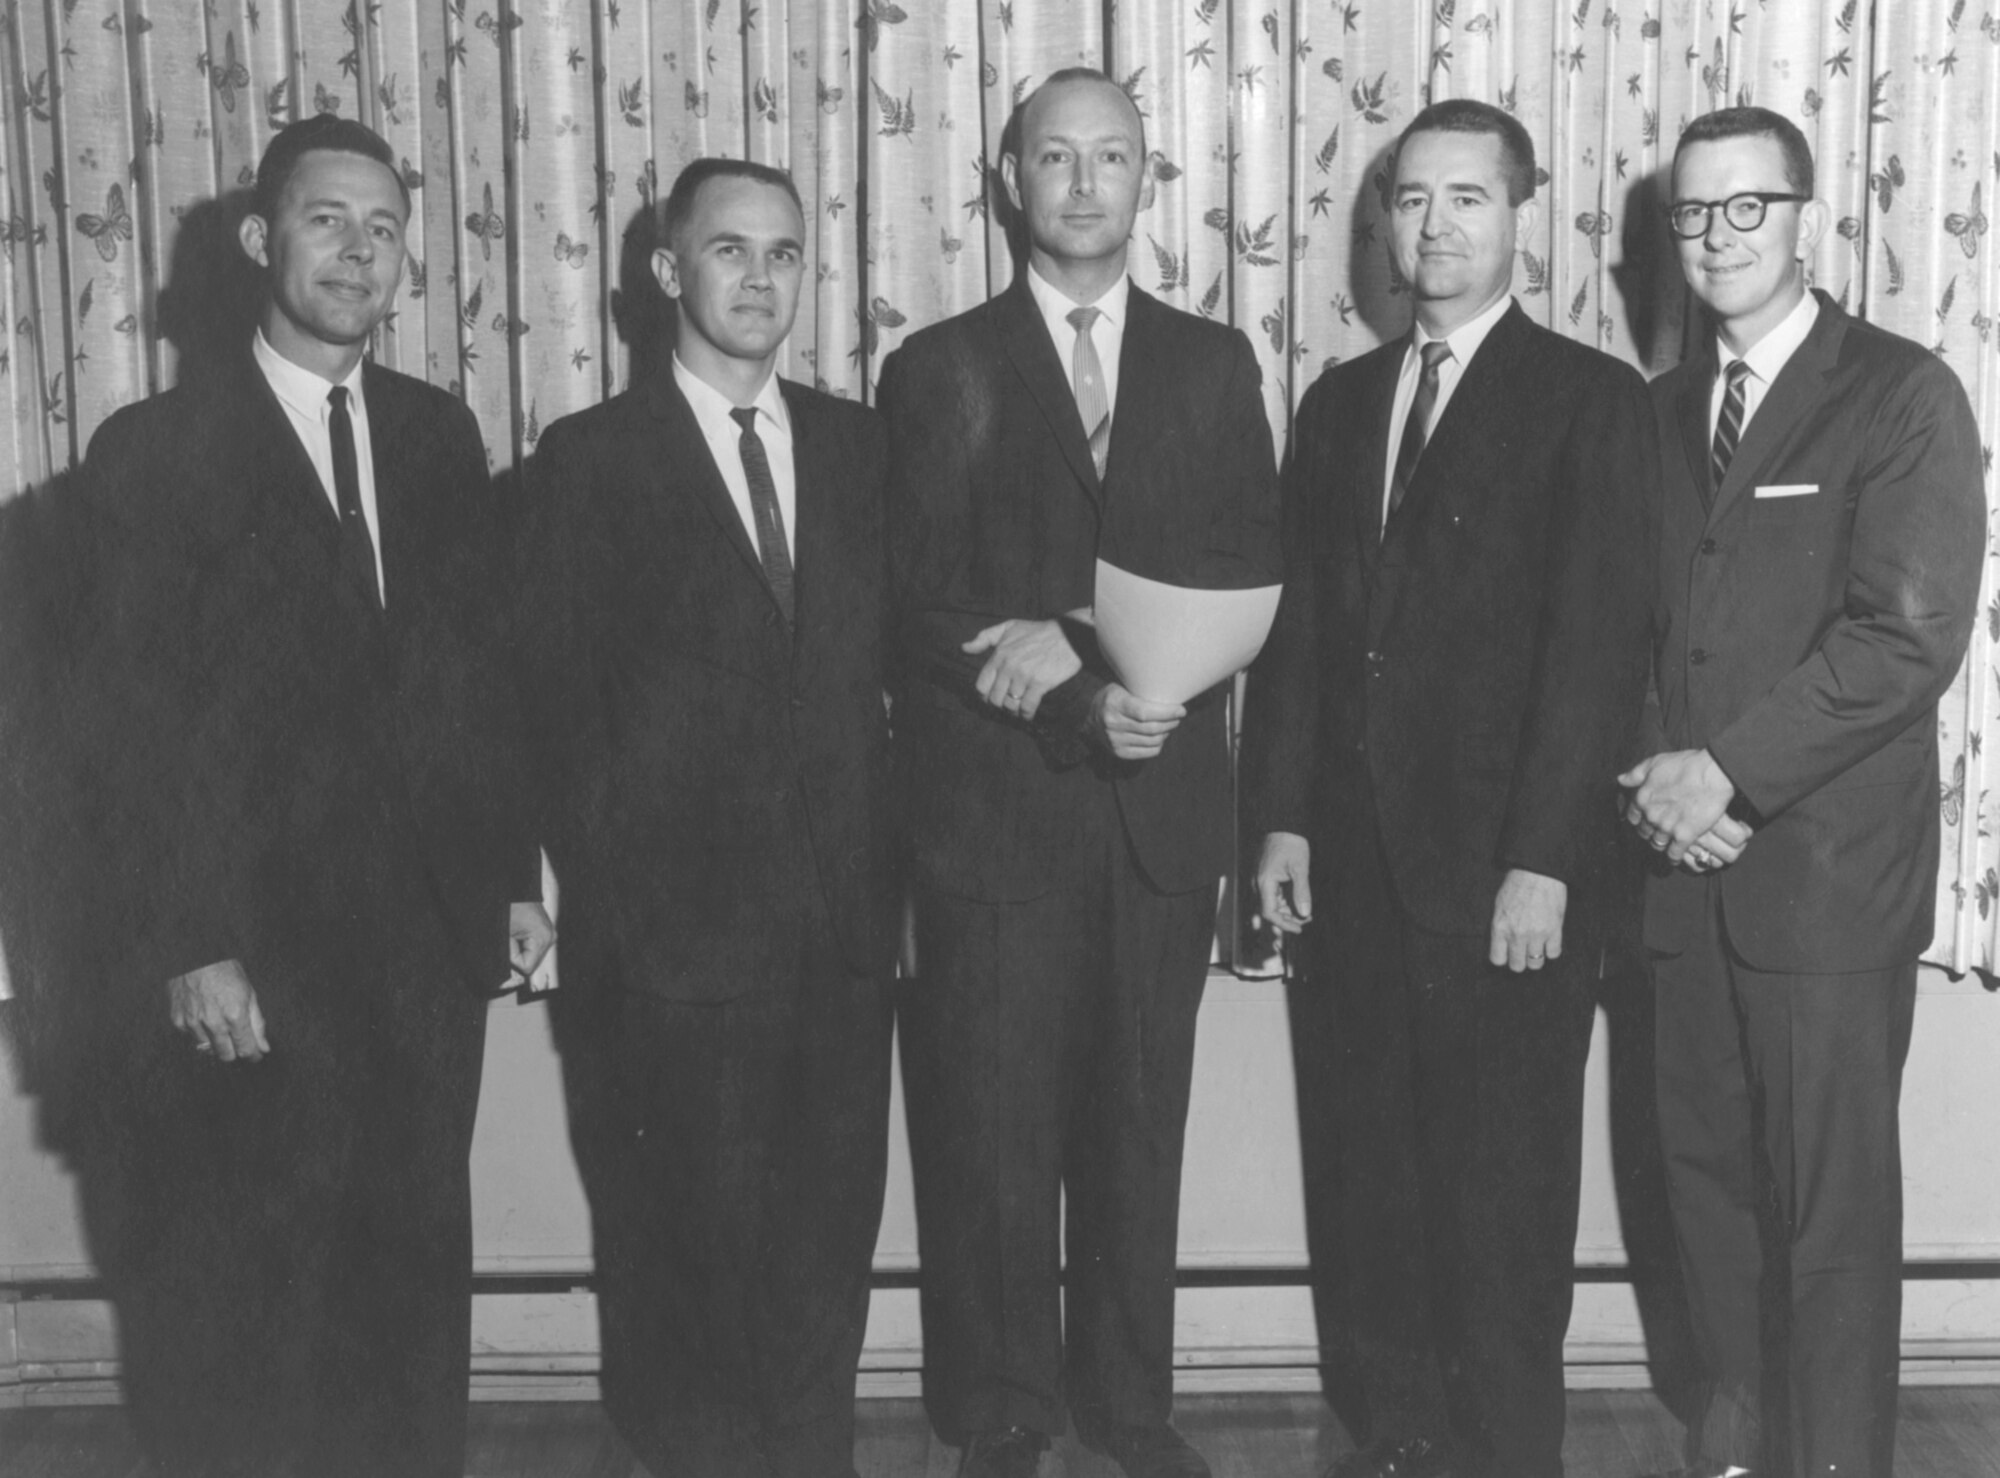 Dr. James Cunningham, center, is photographed with other officers of the Institute of Electrical and Electronics Engineers in the 1960s. Cunningham was chairman of the Middle Tennessee Section of the IEEE from 1966 to 1967. Cunningham, honored as an Arnold Engineering Development Complex Fellow in 2006, passed away May 11, 2023. He spent more than 40 years of his 55-year career at Arnold Air Force Base, Tenn. (U.S. Air Force photo)